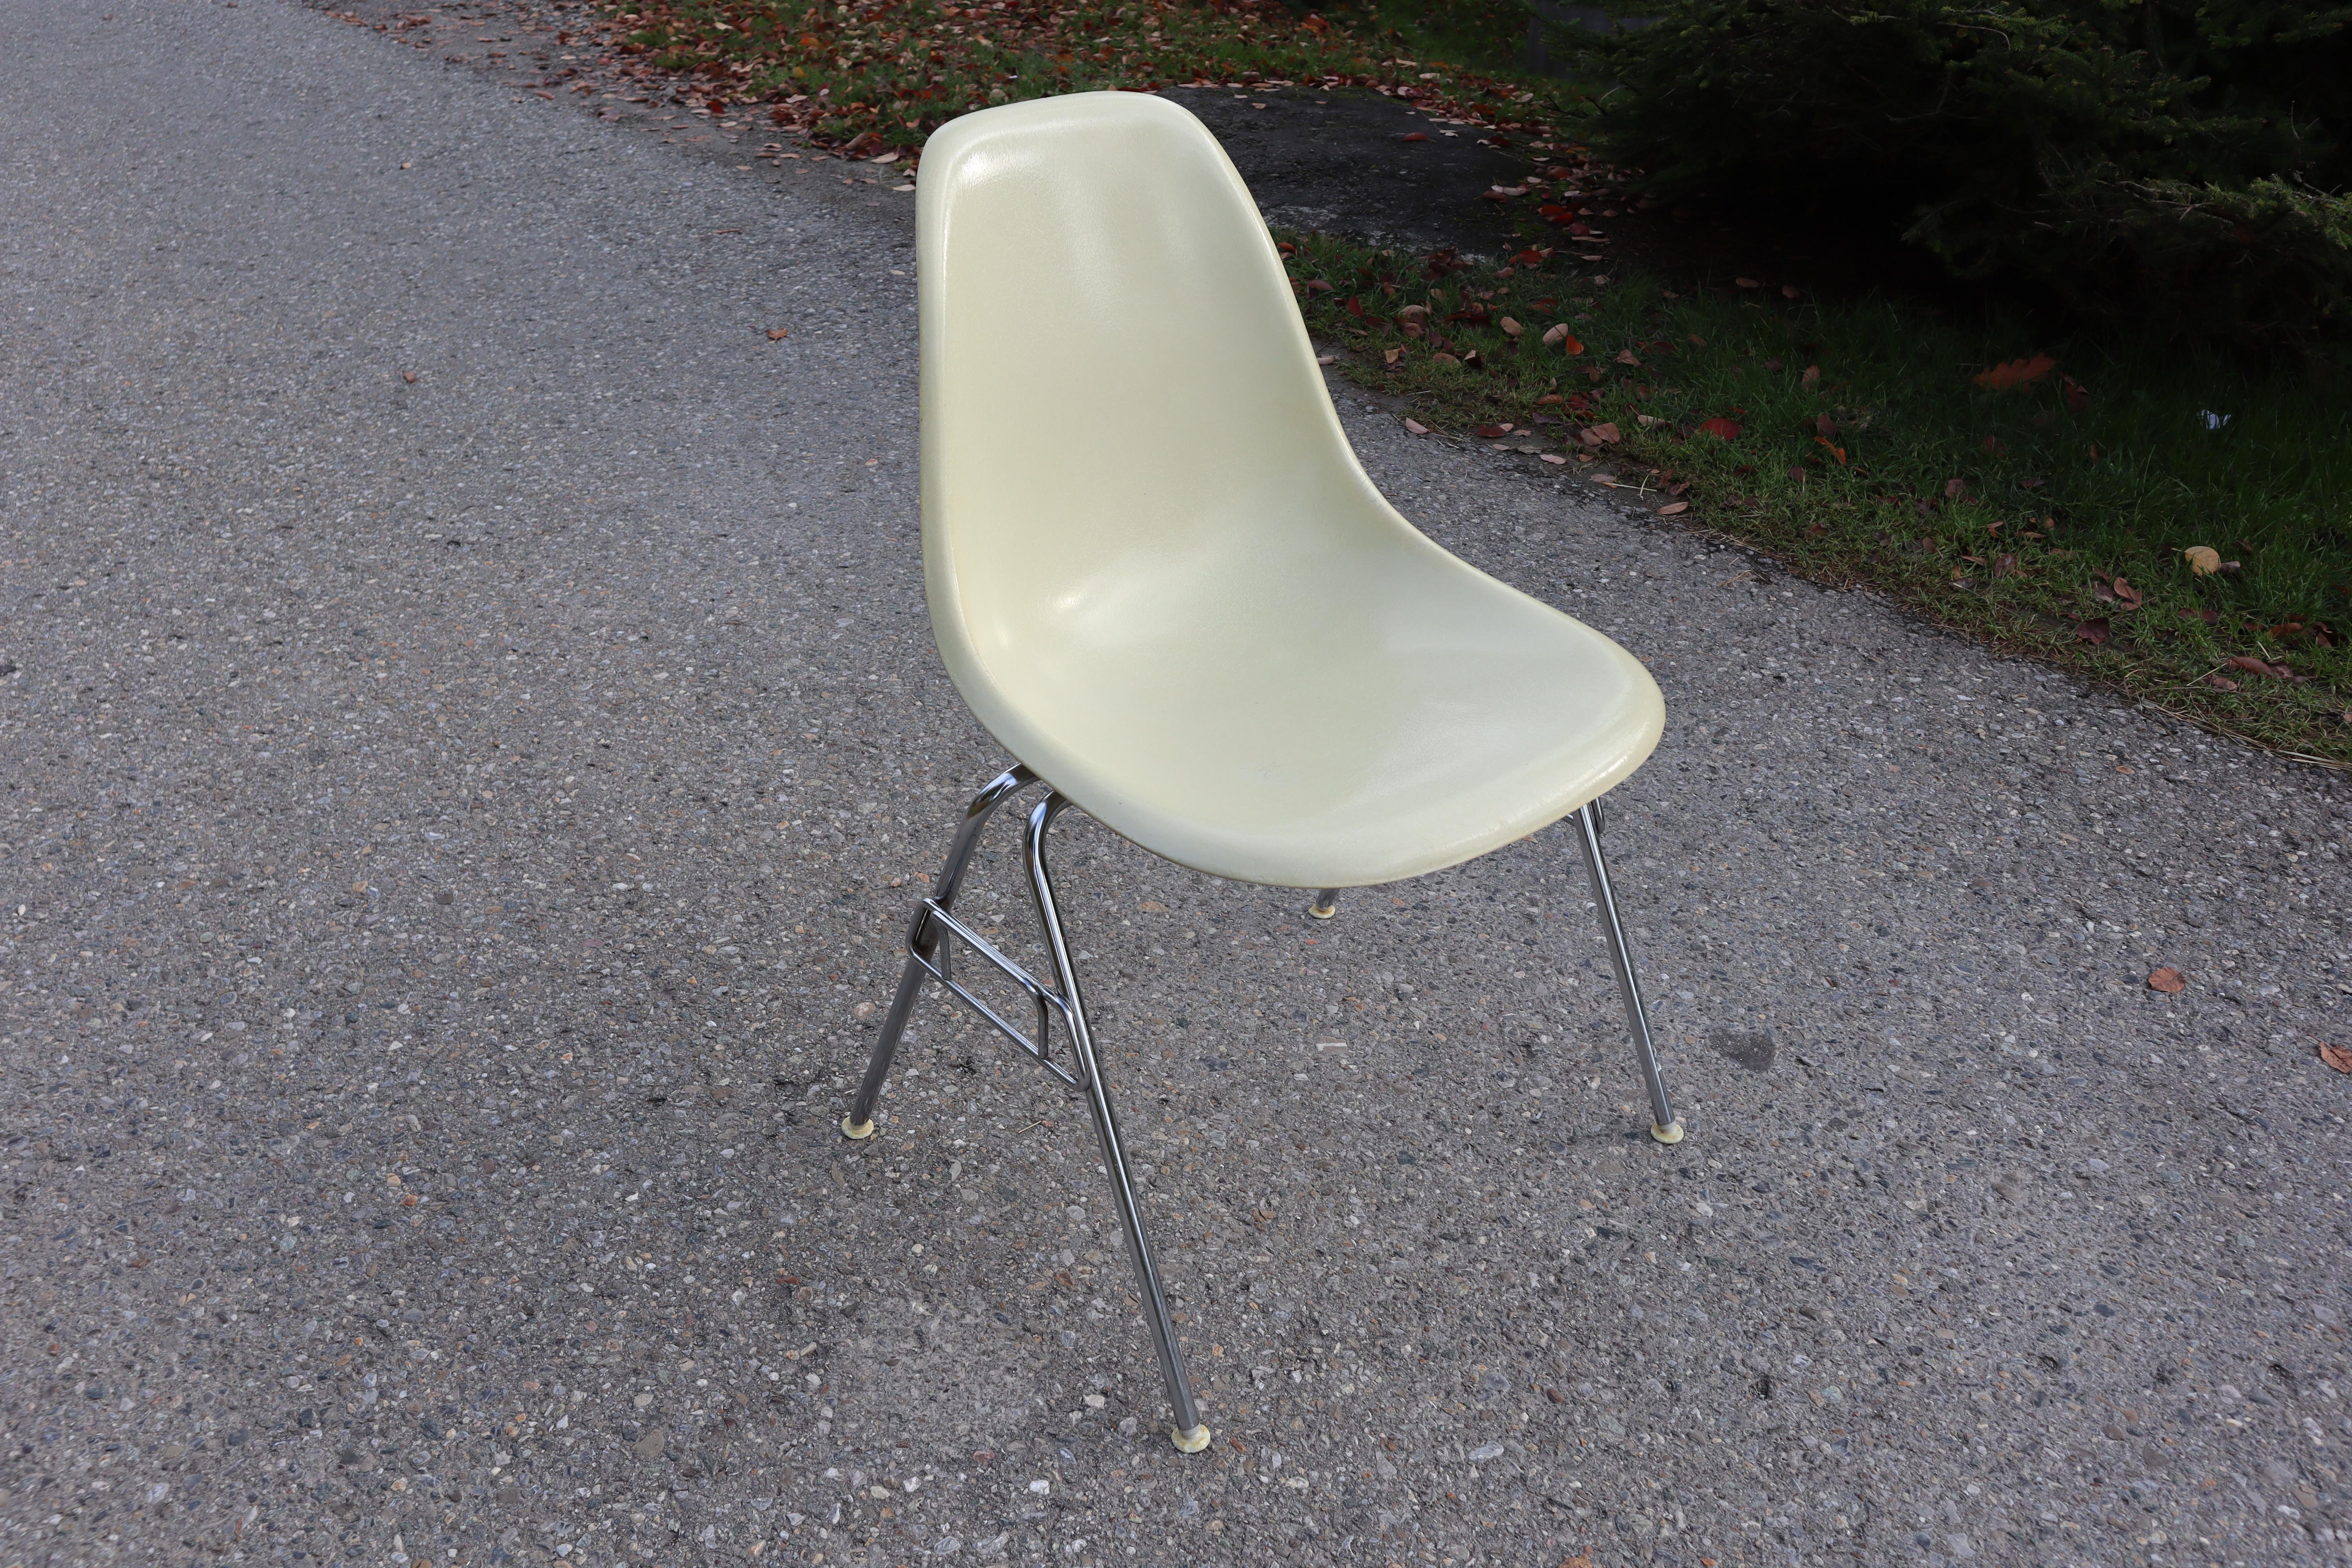 A set of 30 fiberglass DSS stacking dining chairs with H bases and nylon floor glides. Eggshell fiberglass with the Herman Miller molded manufactures mark and ink stamp to the bottoms. Original.

Ask about economical or fast shipping options.

The